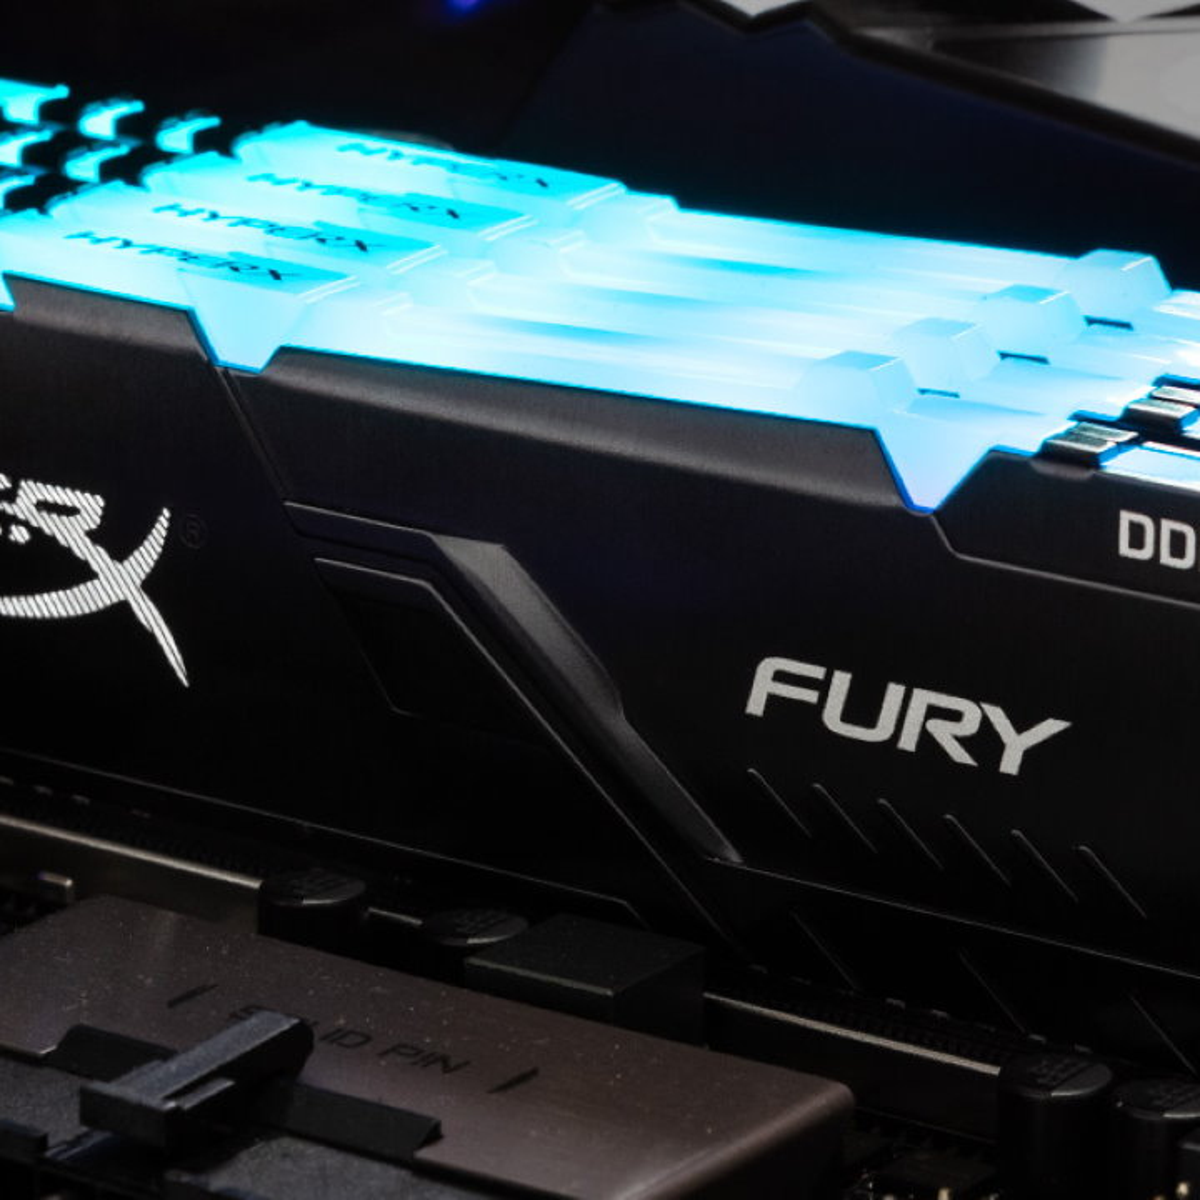 Kingston launch new Fury RAM series as they finish up their sale